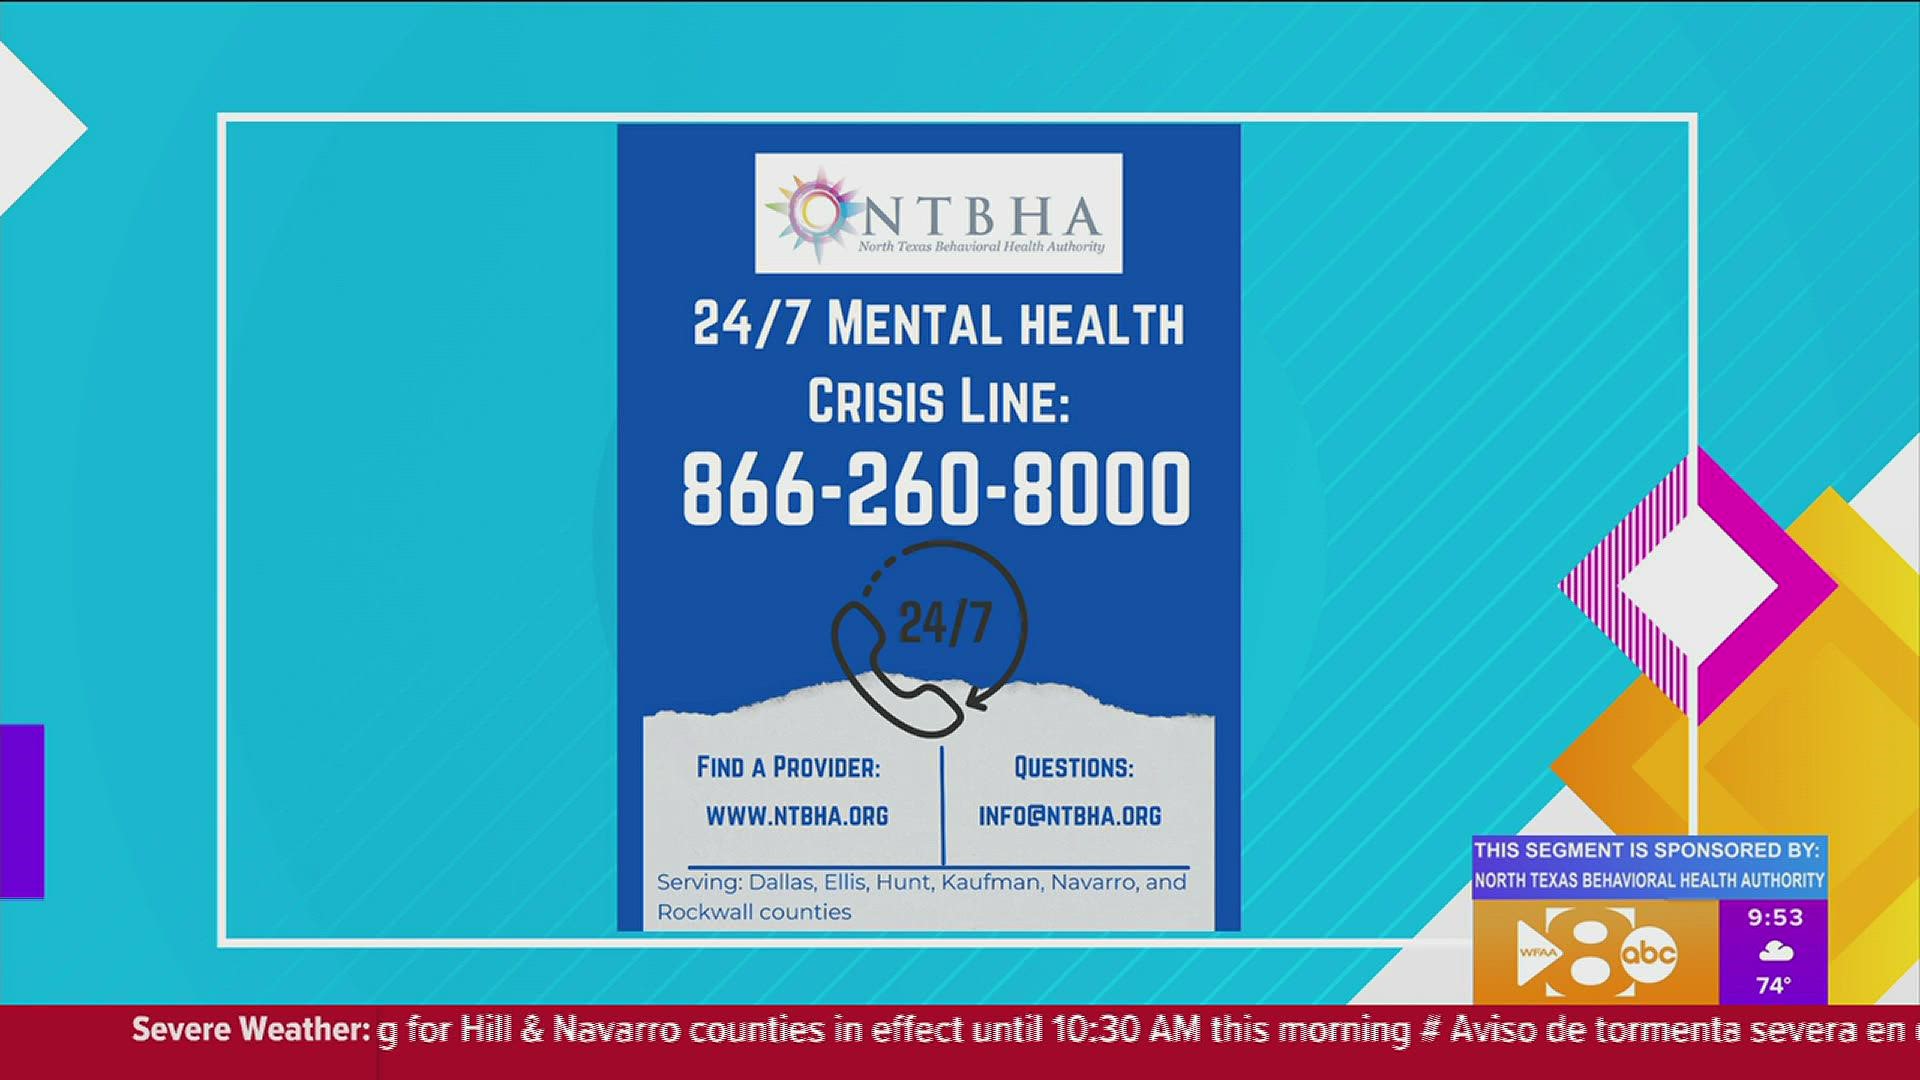 This segment is sponsored by: North Texas Behavioral Health Authority